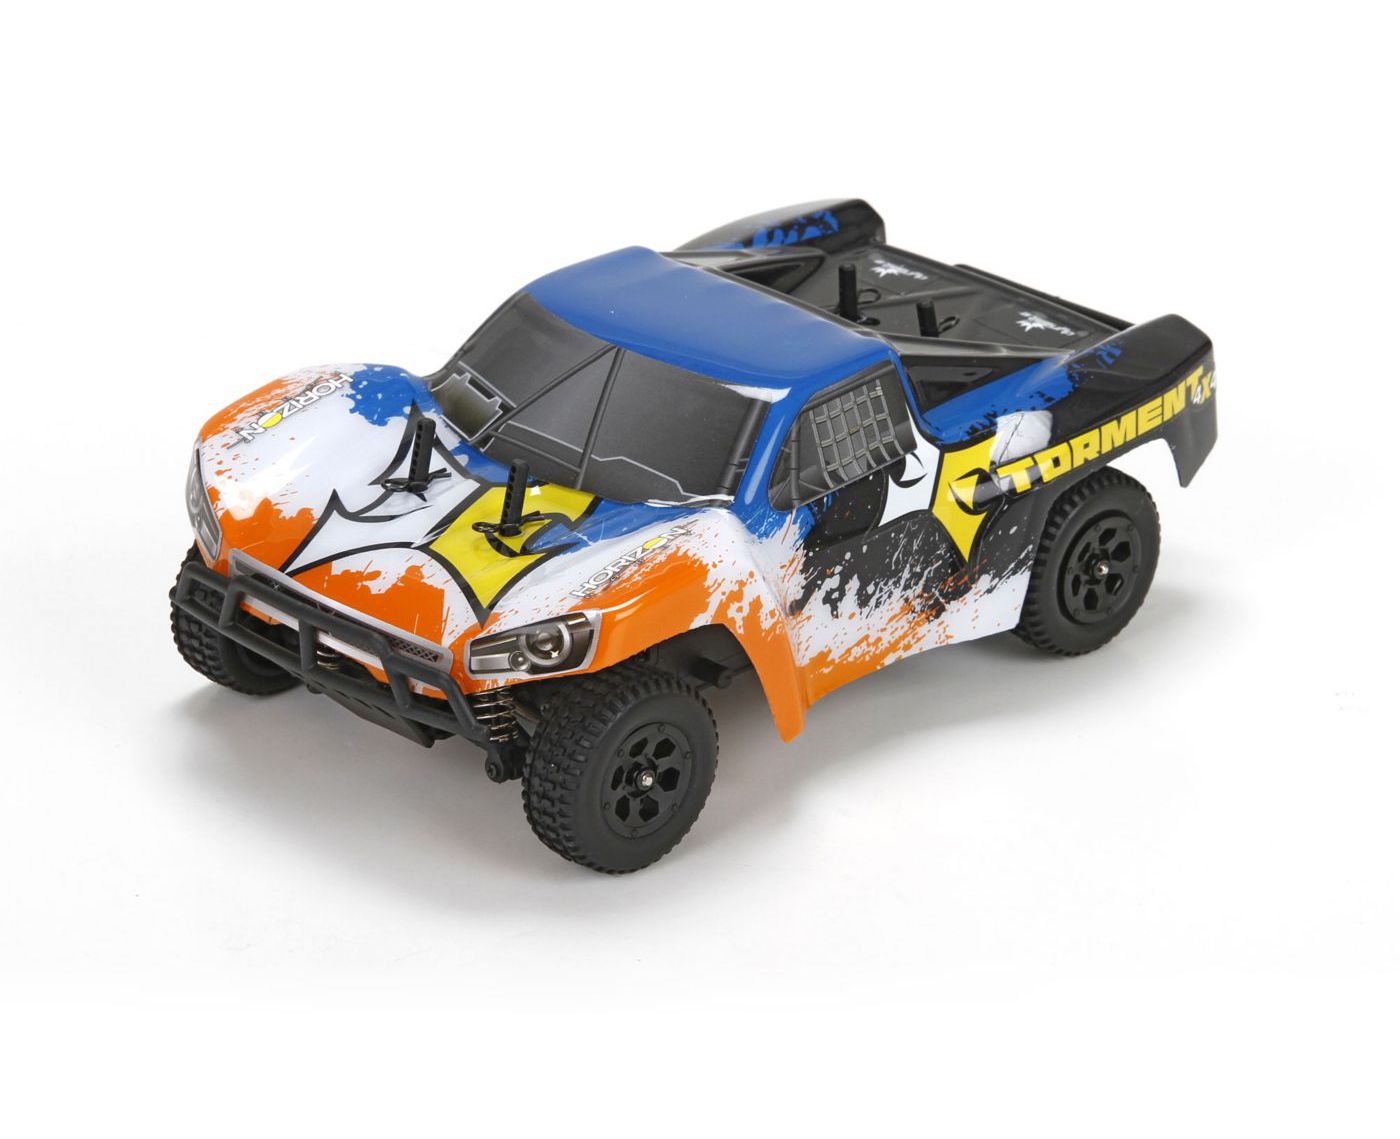  1/24 - Torment 4WD RTR